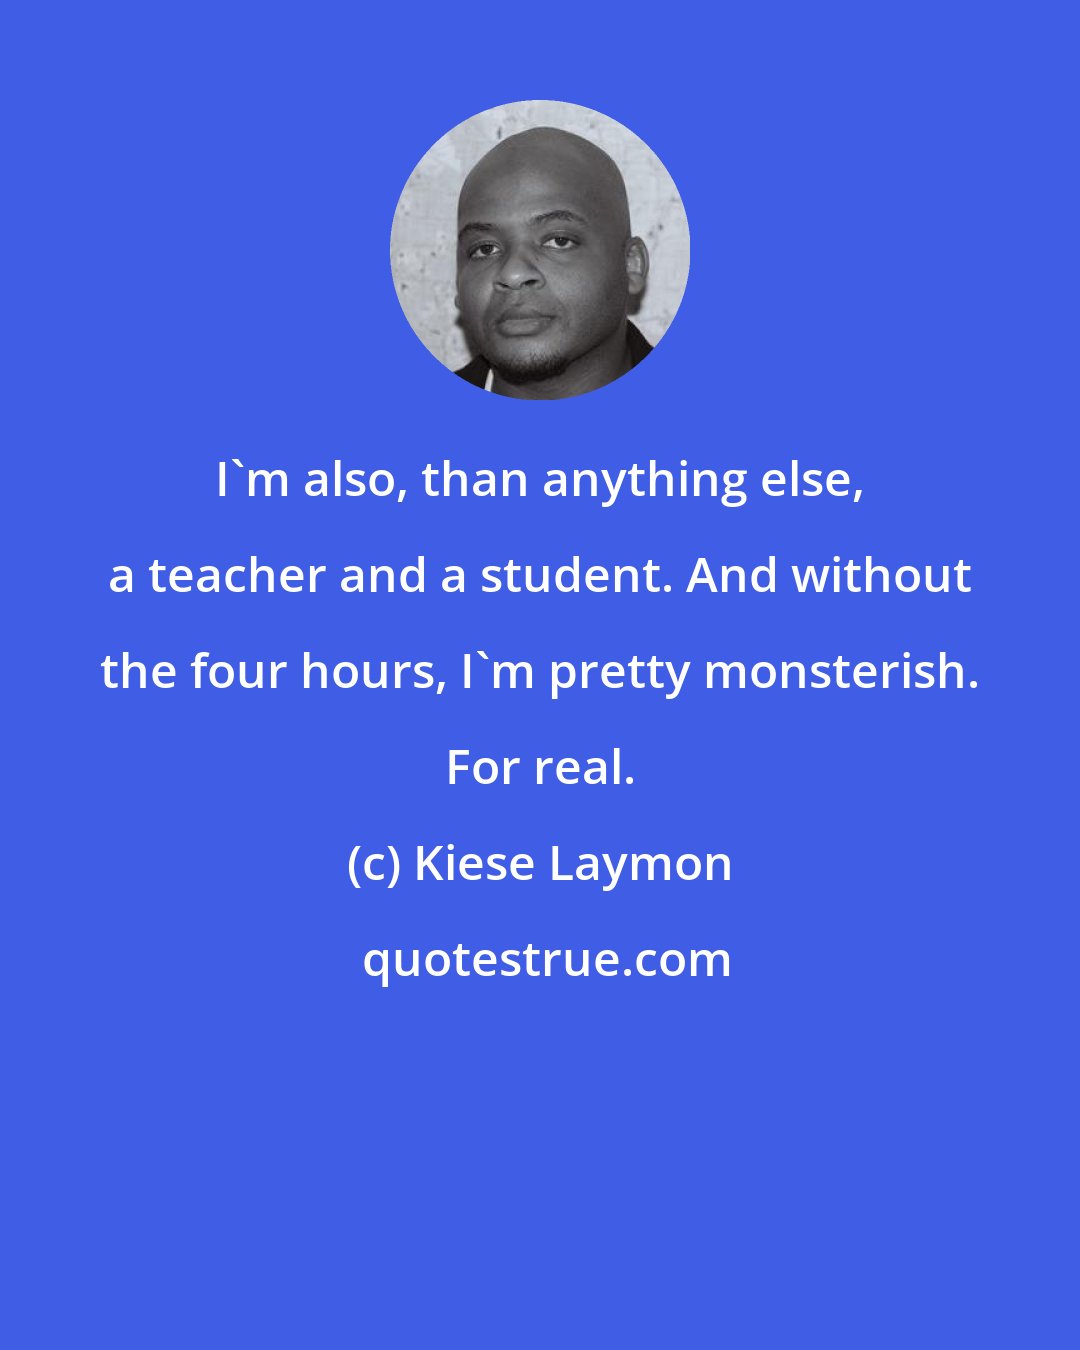 Kiese Laymon: I'm also, than anything else, a teacher and a student. And without the four hours, I'm pretty monsterish. For real.